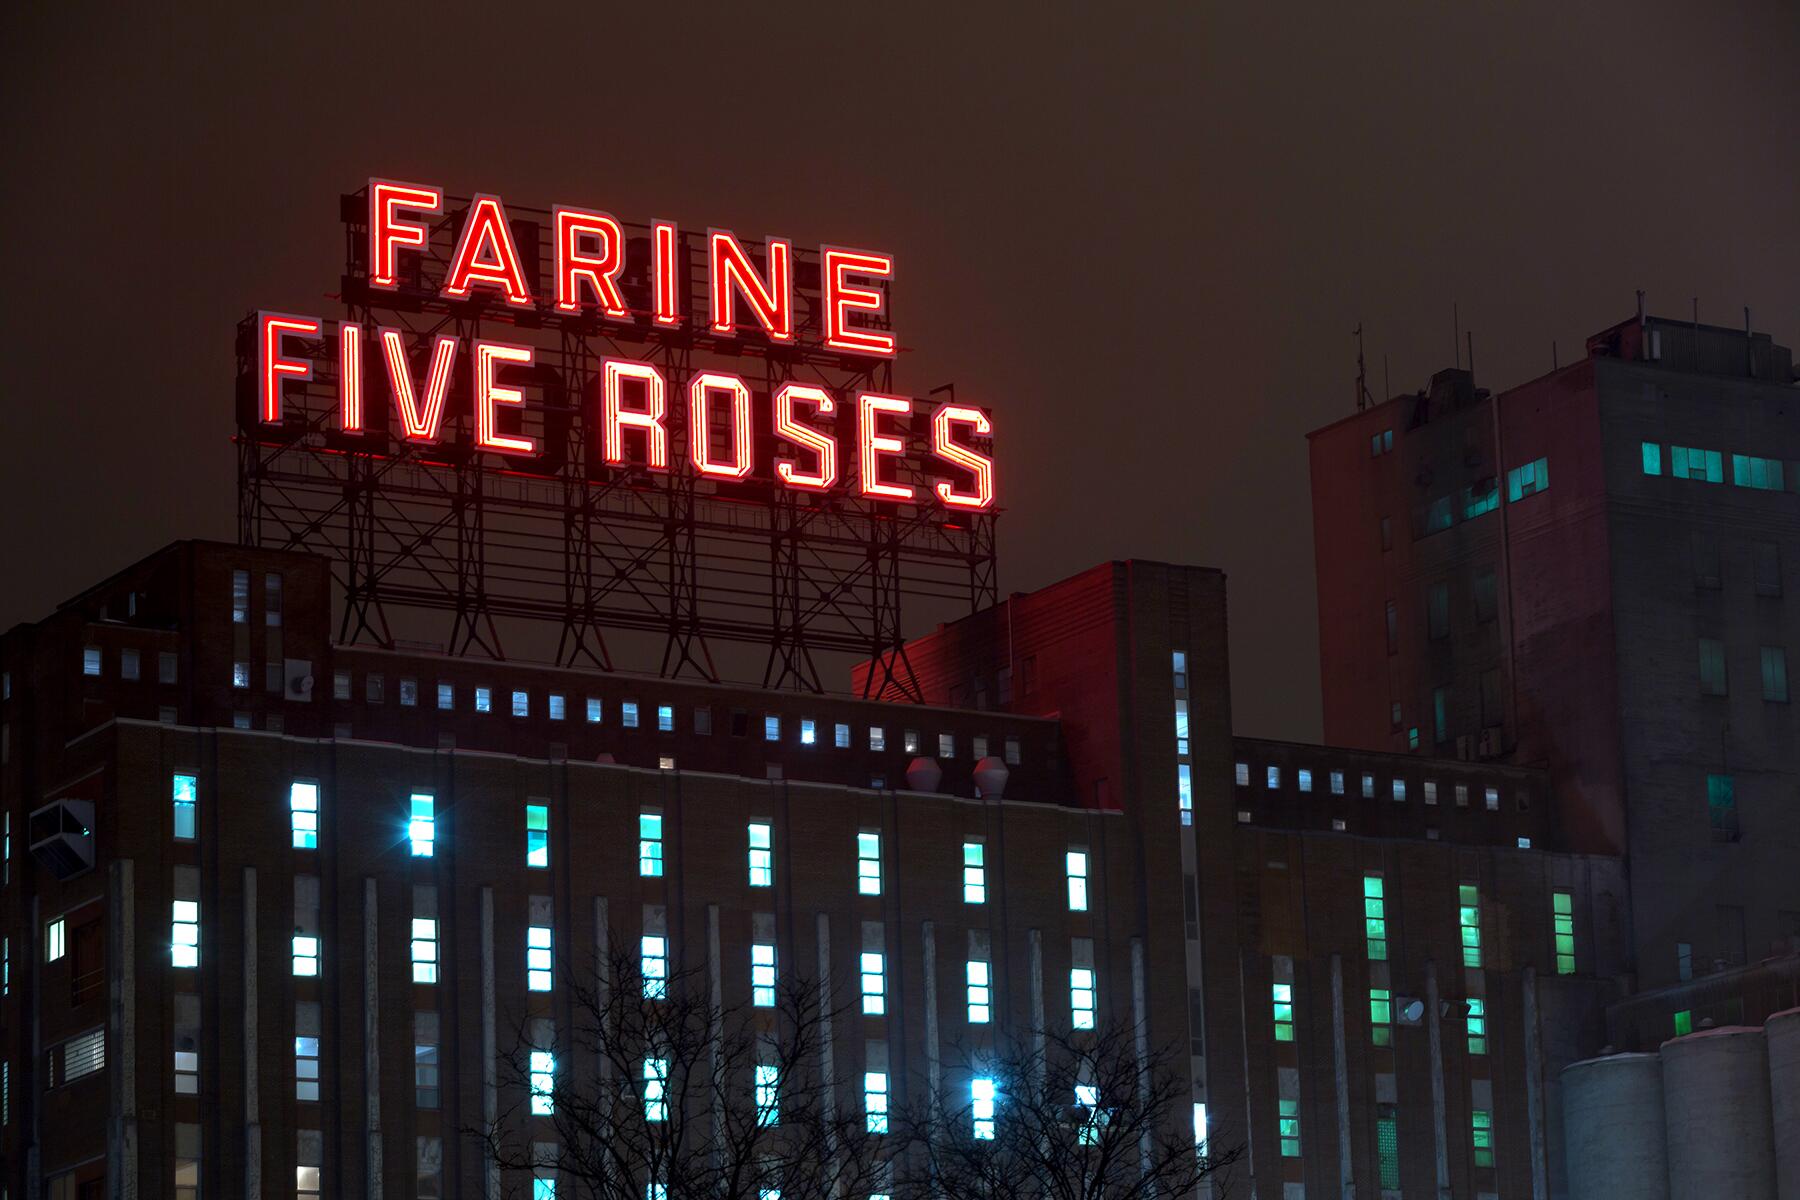 10 Iconic Neon Signs in Cities Around the World